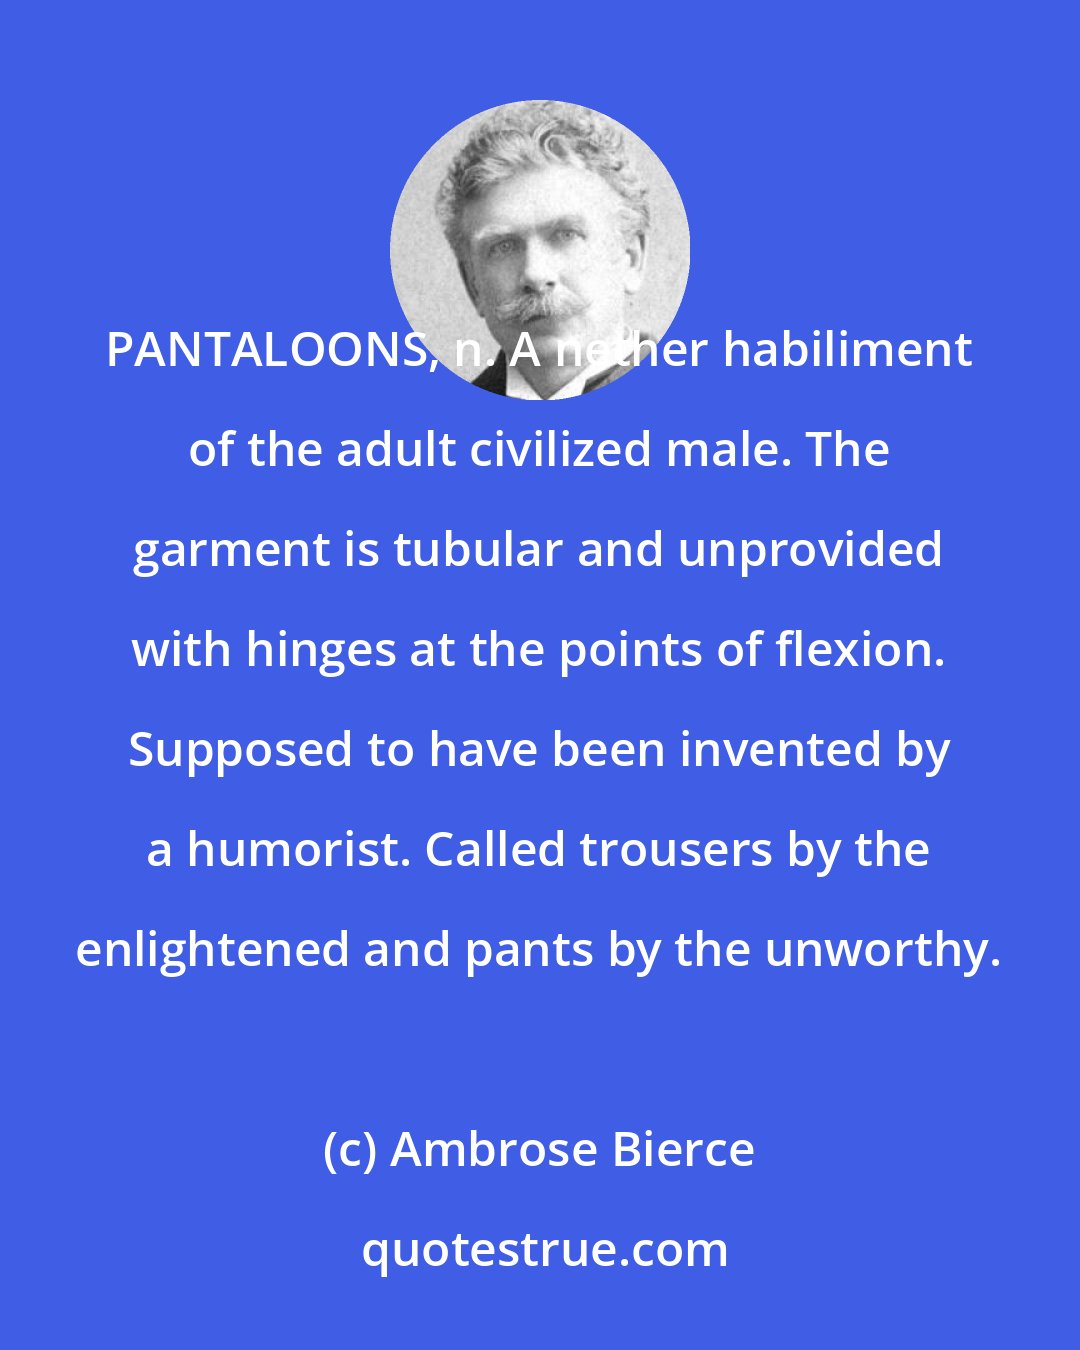 Ambrose Bierce: PANTALOONS, n. A nether habiliment of the adult civilized male. The garment is tubular and unprovided with hinges at the points of flexion. Supposed to have been invented by a humorist. Called trousers by the enlightened and pants by the unworthy.